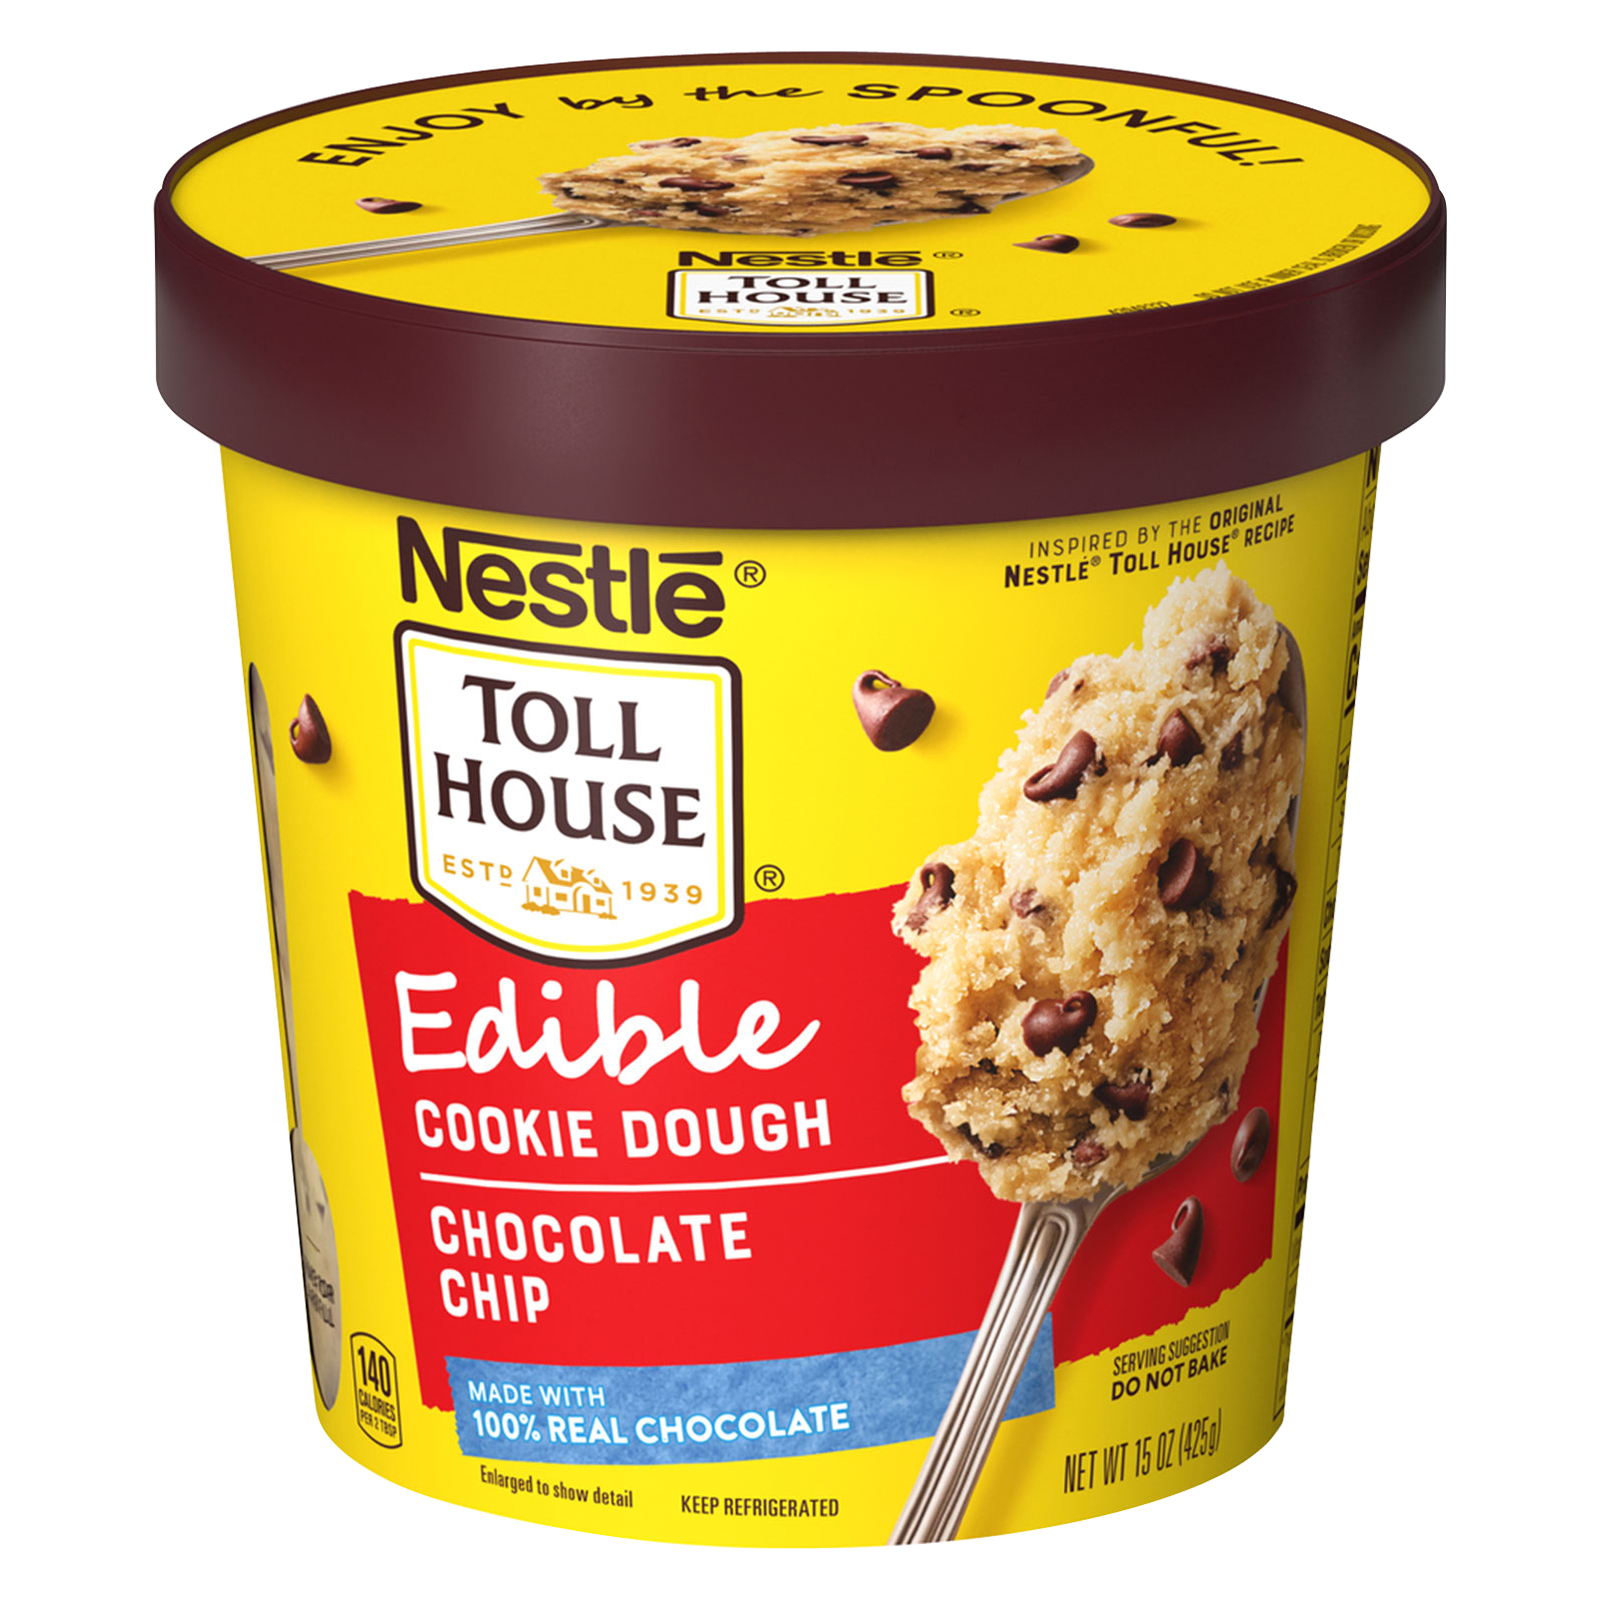 Toll House Chocolate Chip Edible Cookie Dough - 15oz